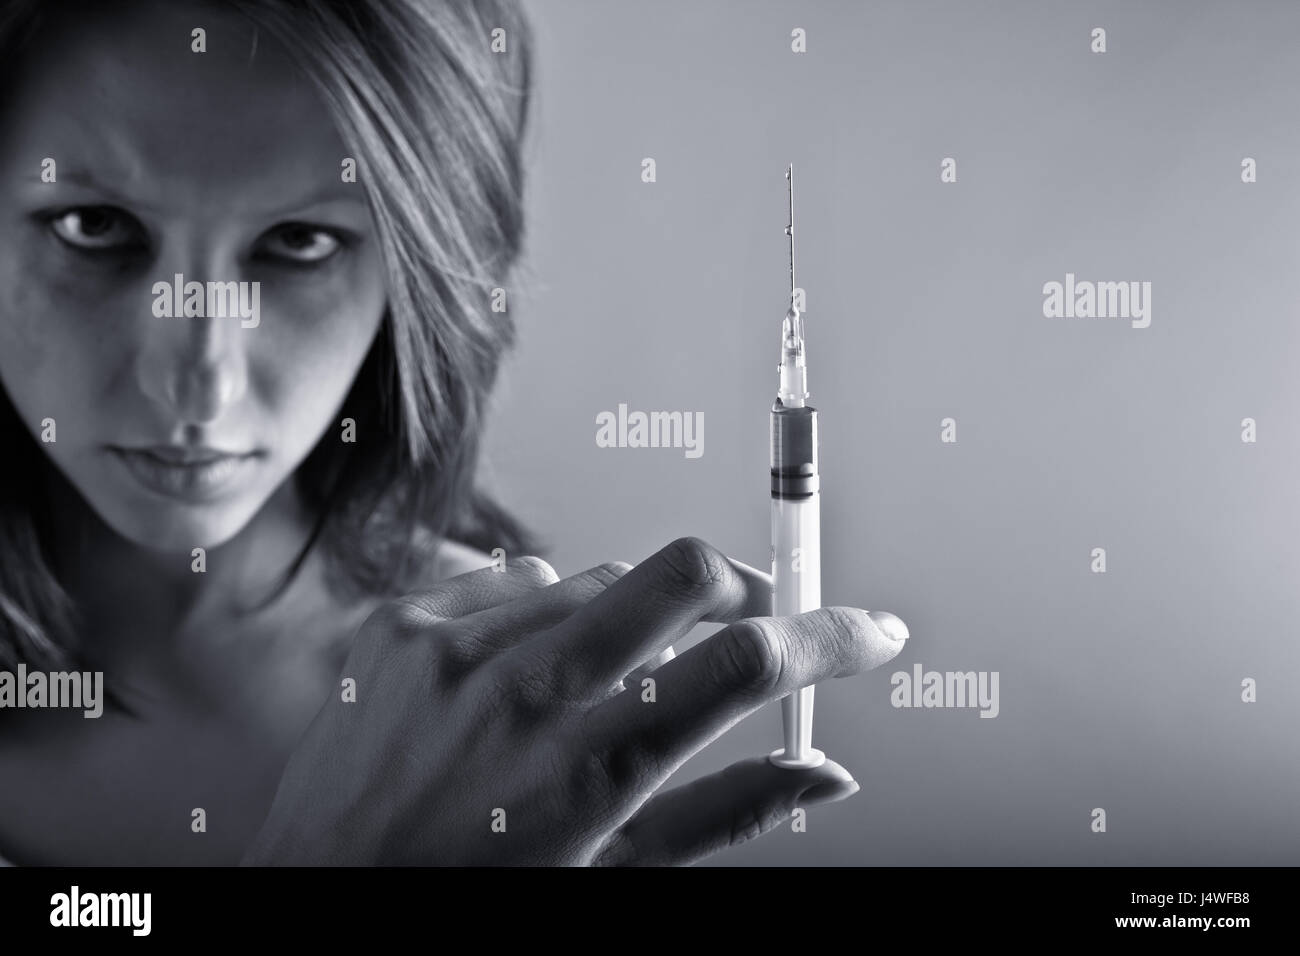 Young woman with drug addiction. Black and white photo Stock Photo